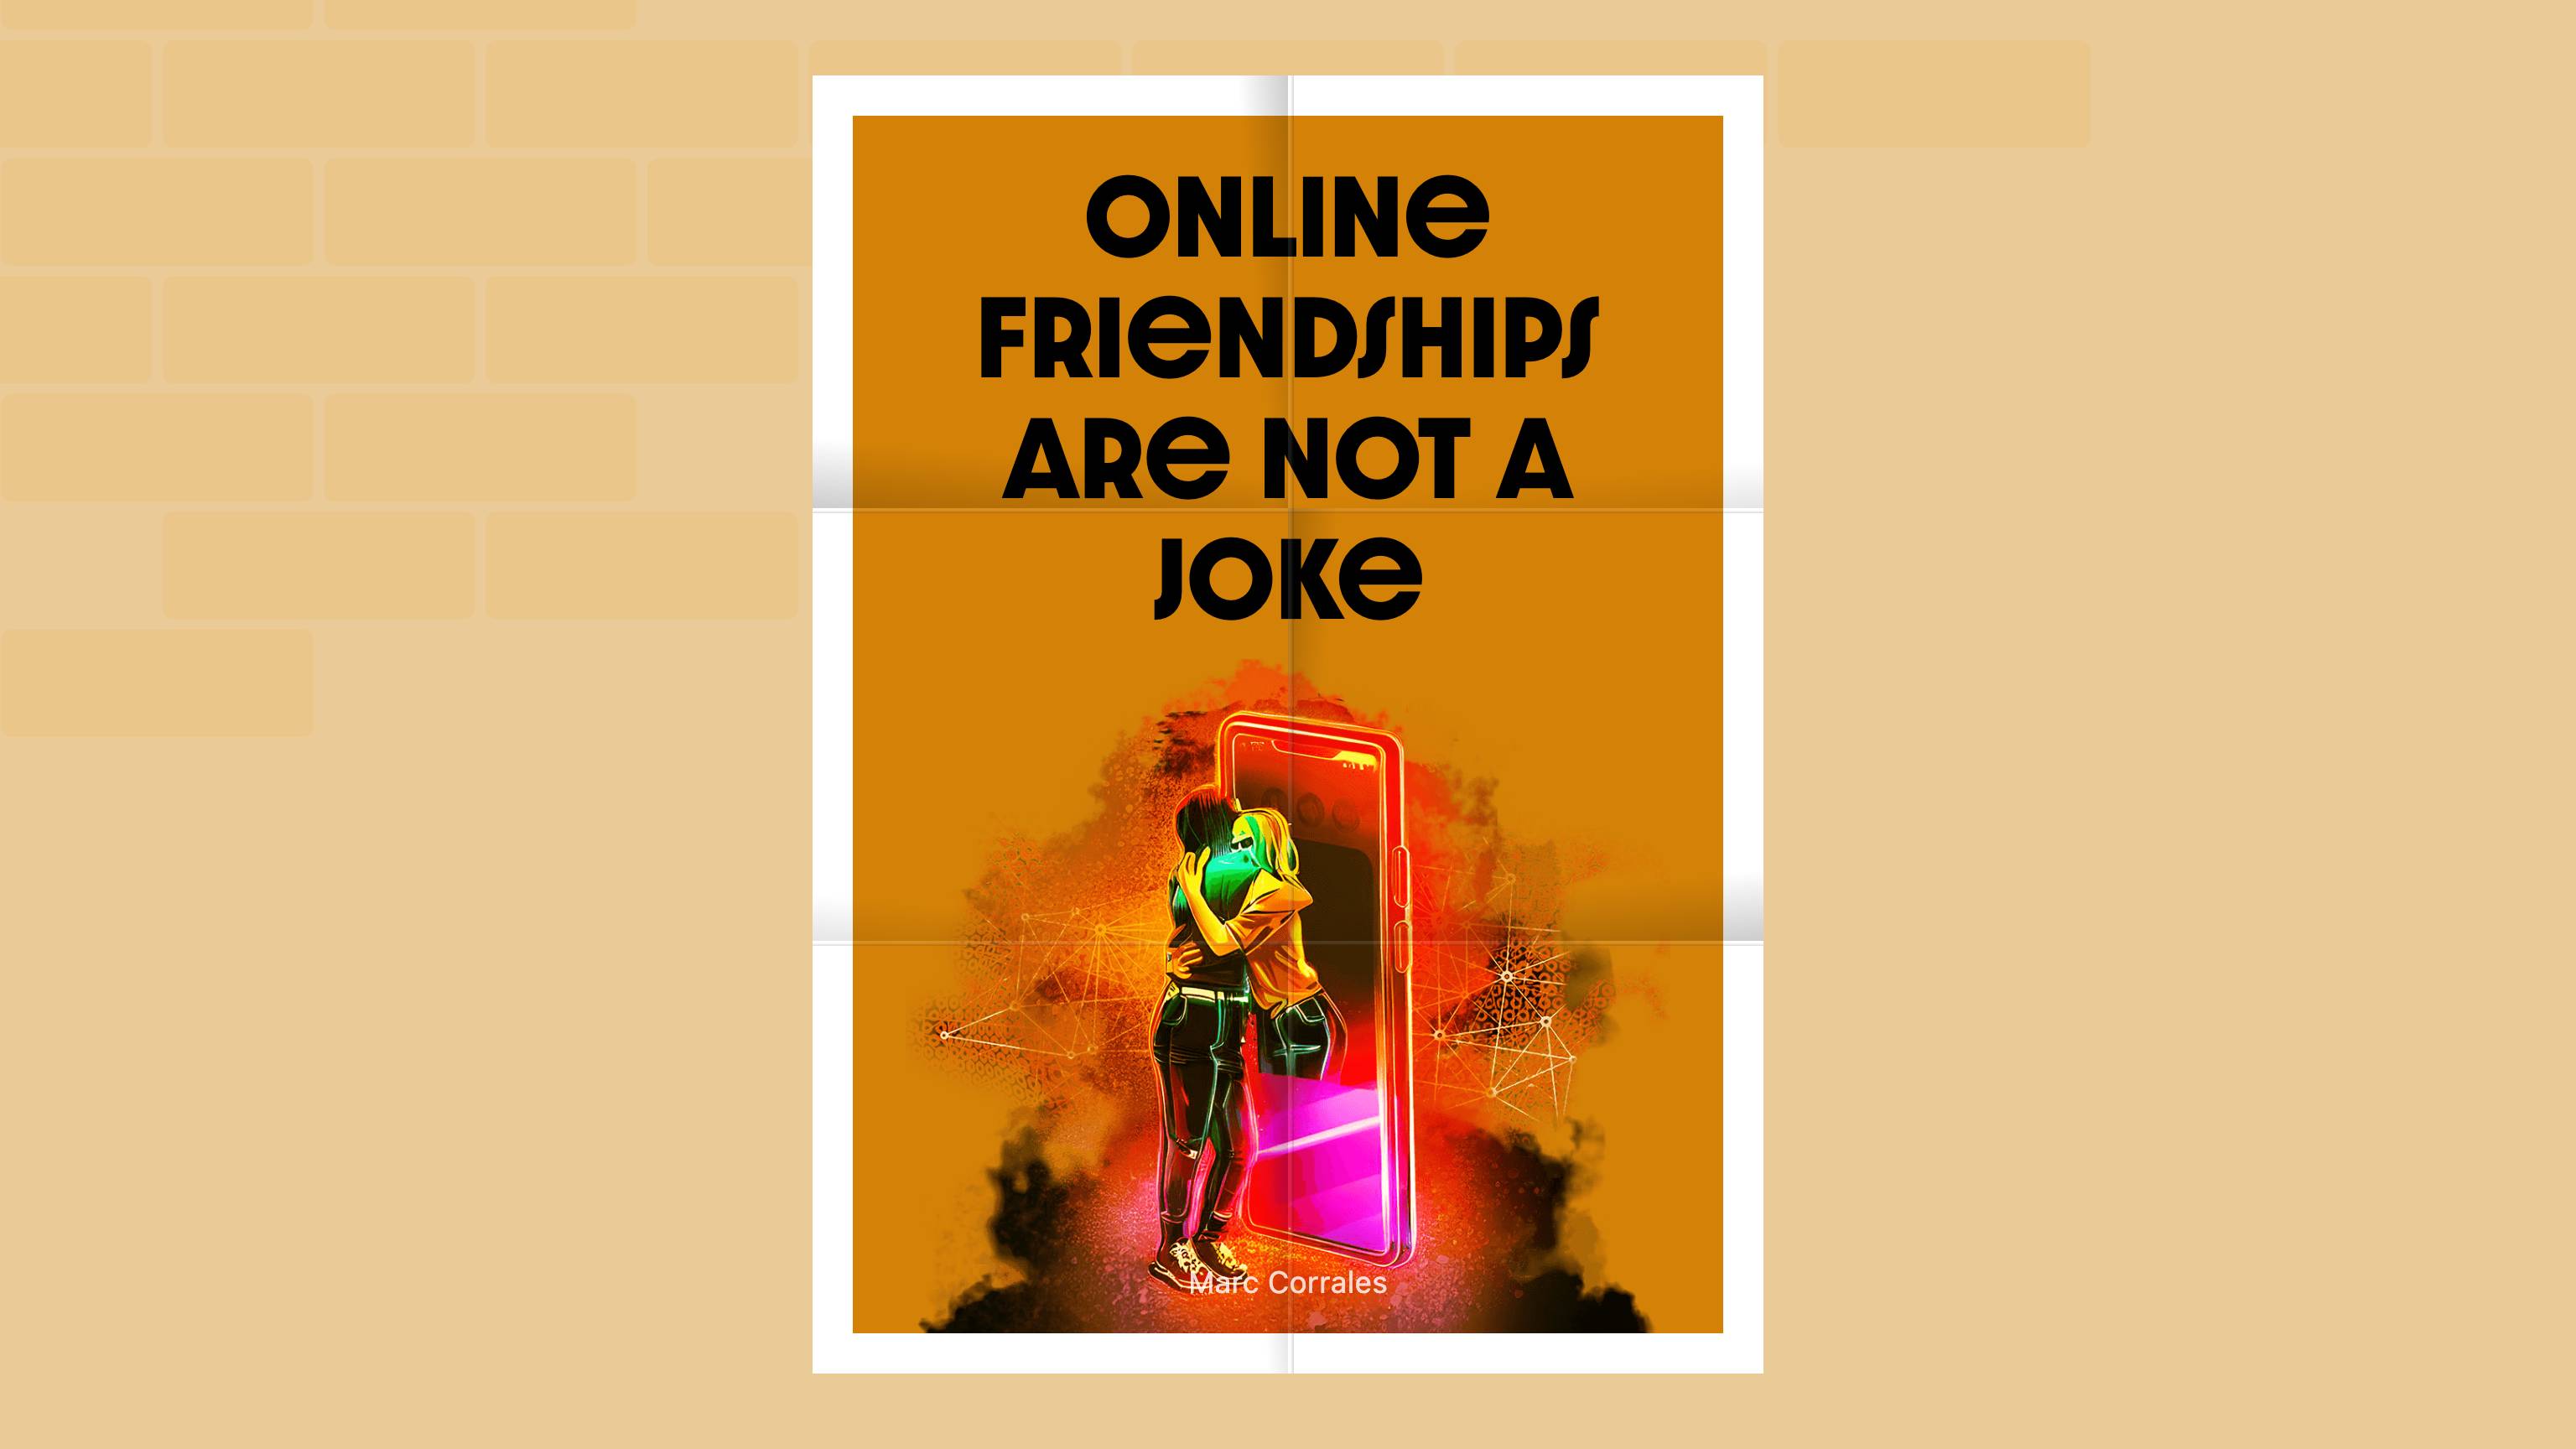 Reasons Online Friendship is Not Possible